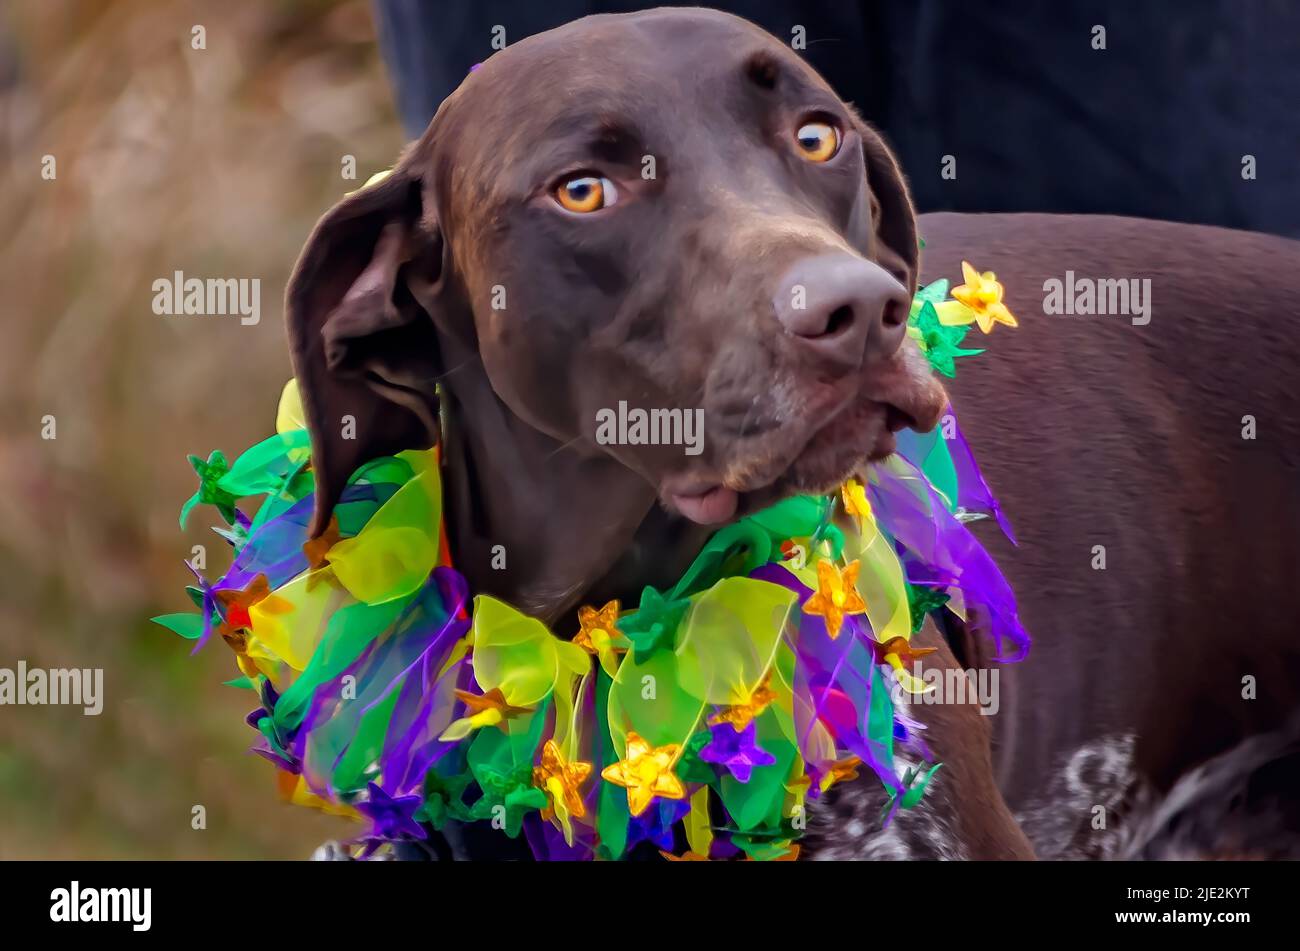 A German Shorthaired Pointer wears a Mardi Gras jester’s collar during a Mardi Gras parade, Feb. 2, 2019, in Dauphin Island, Alabama. Stock Photo